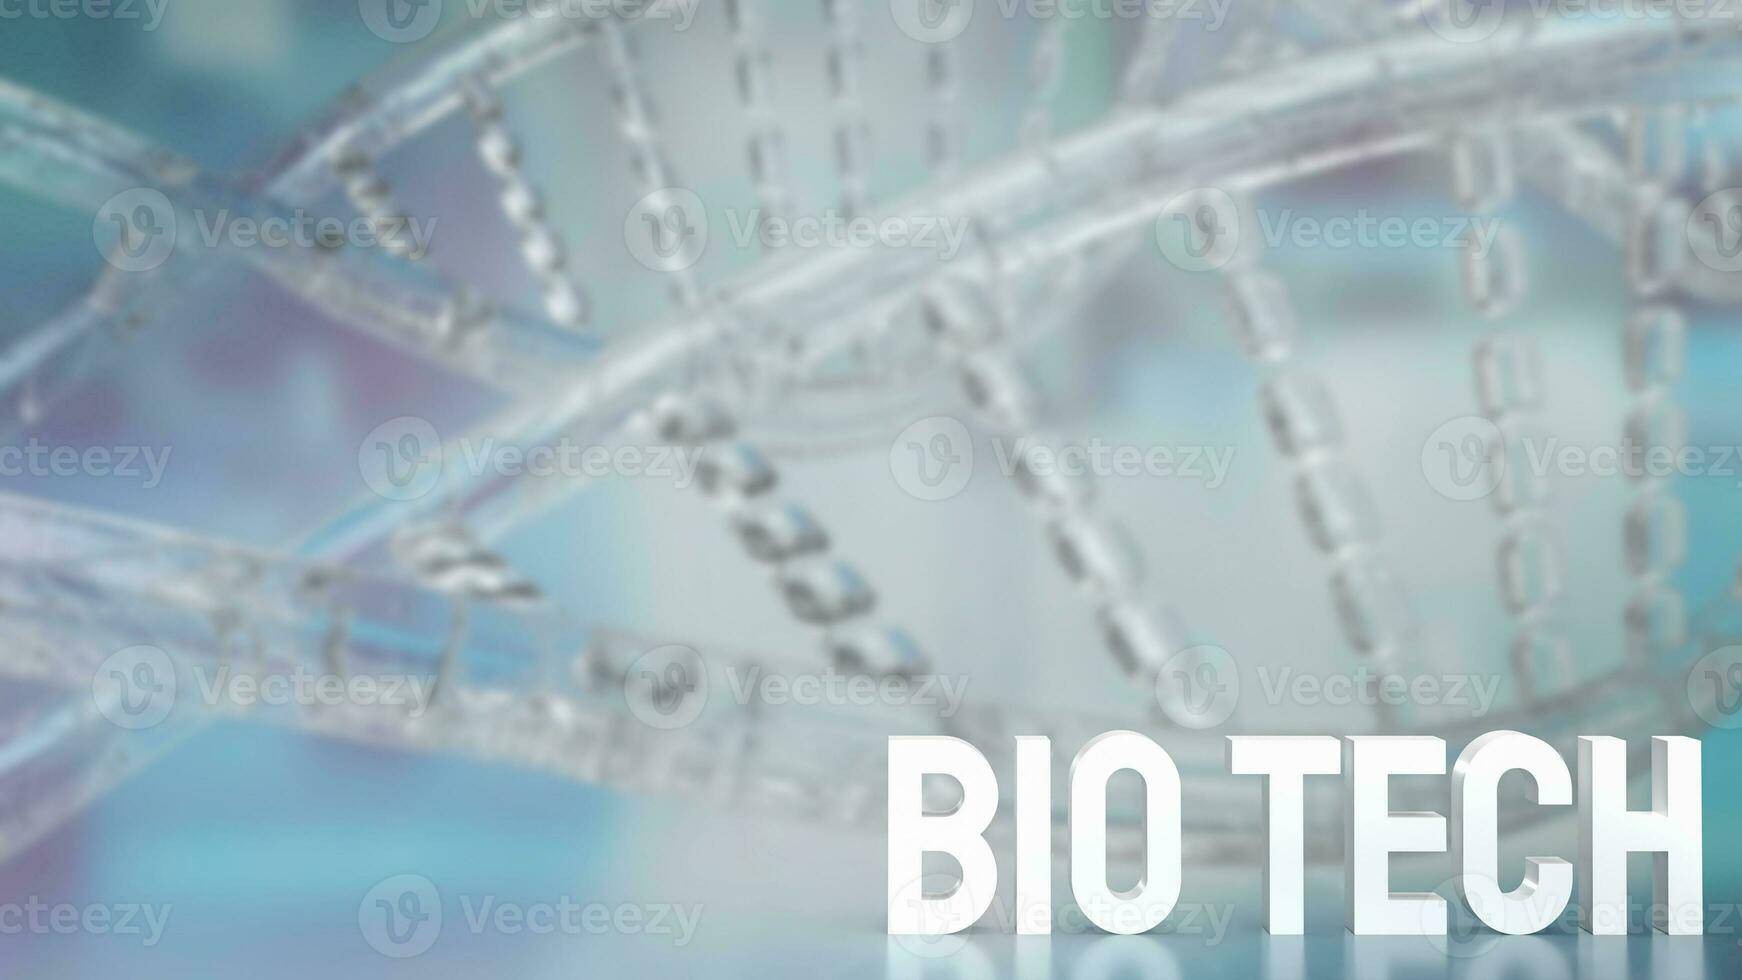 The Biotech and DNA for sci or technology concept 3d rendering photo